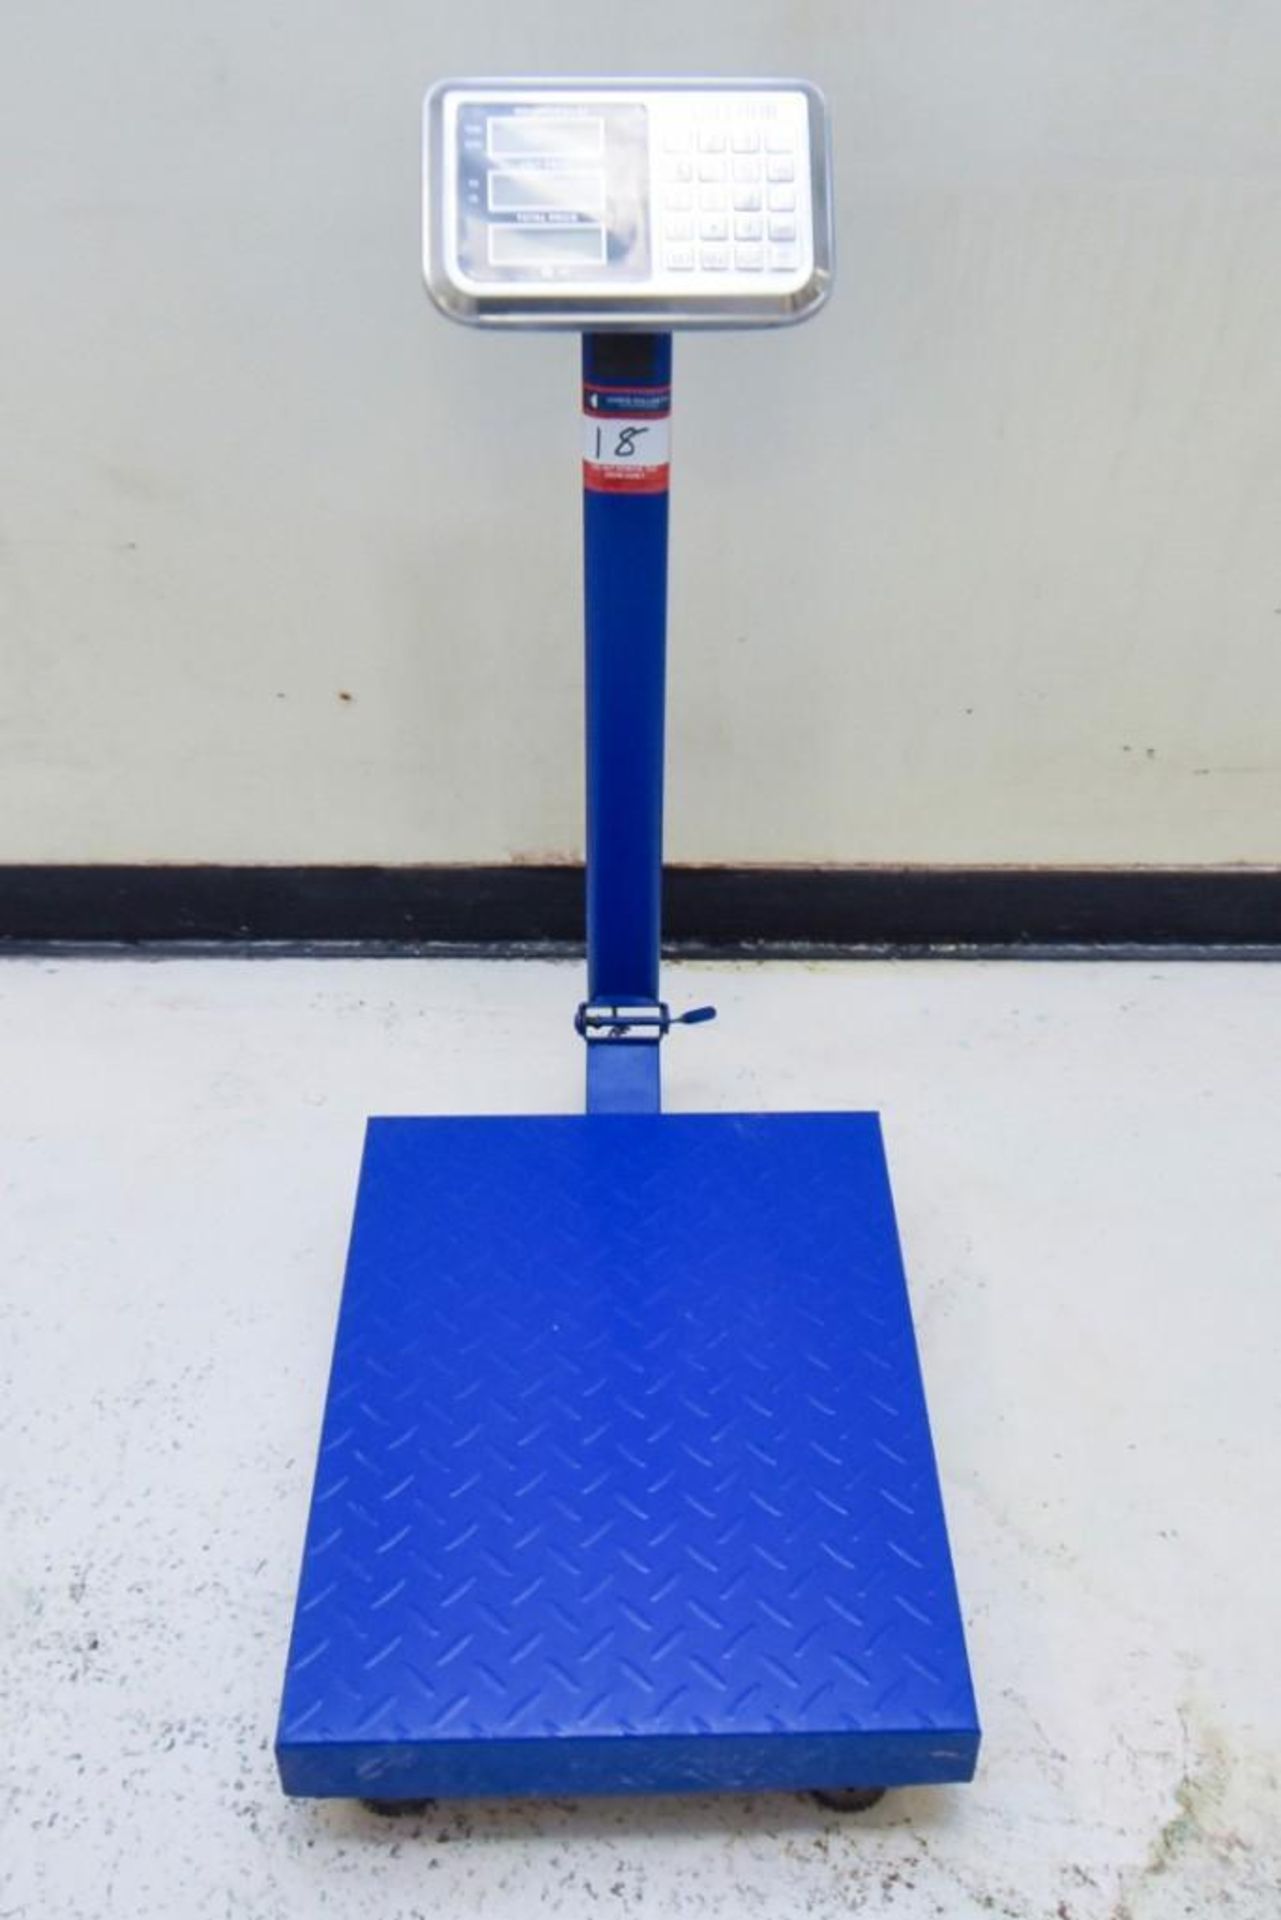 Tuffiom Blue Stand TCS Electronic Scale - Image 2 of 6